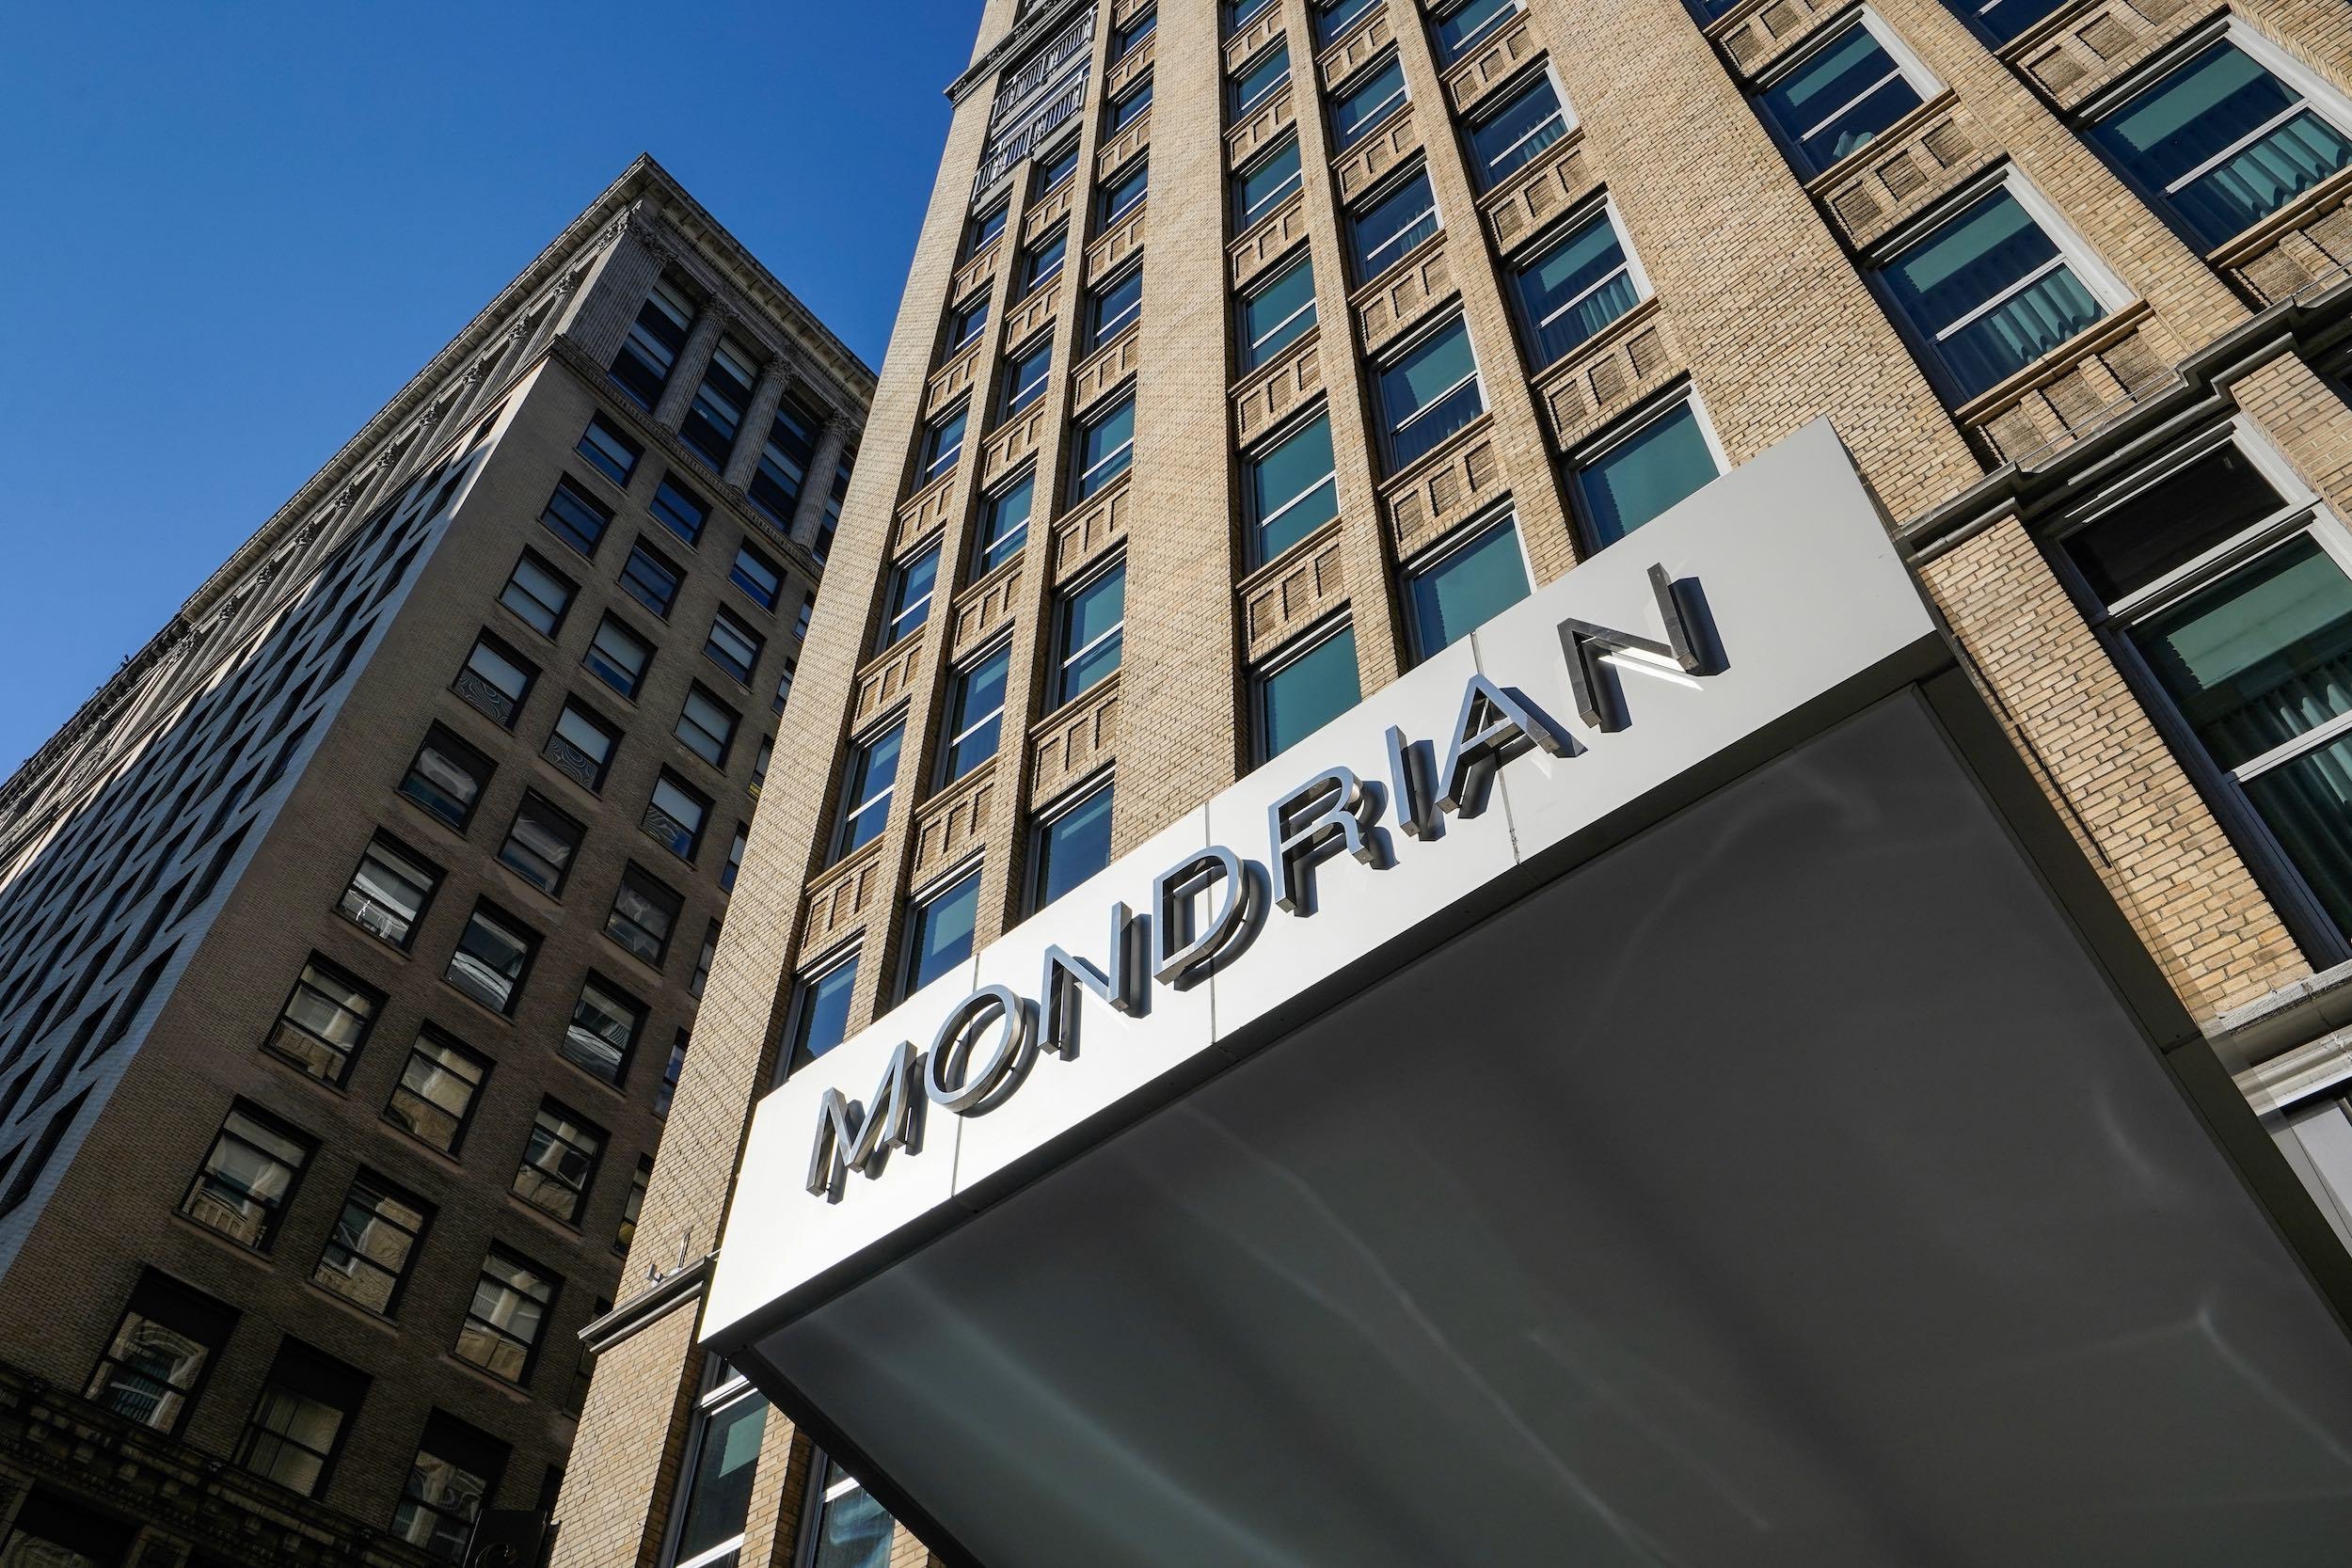 outside of Mondrian Park Avenue hotel building and sign